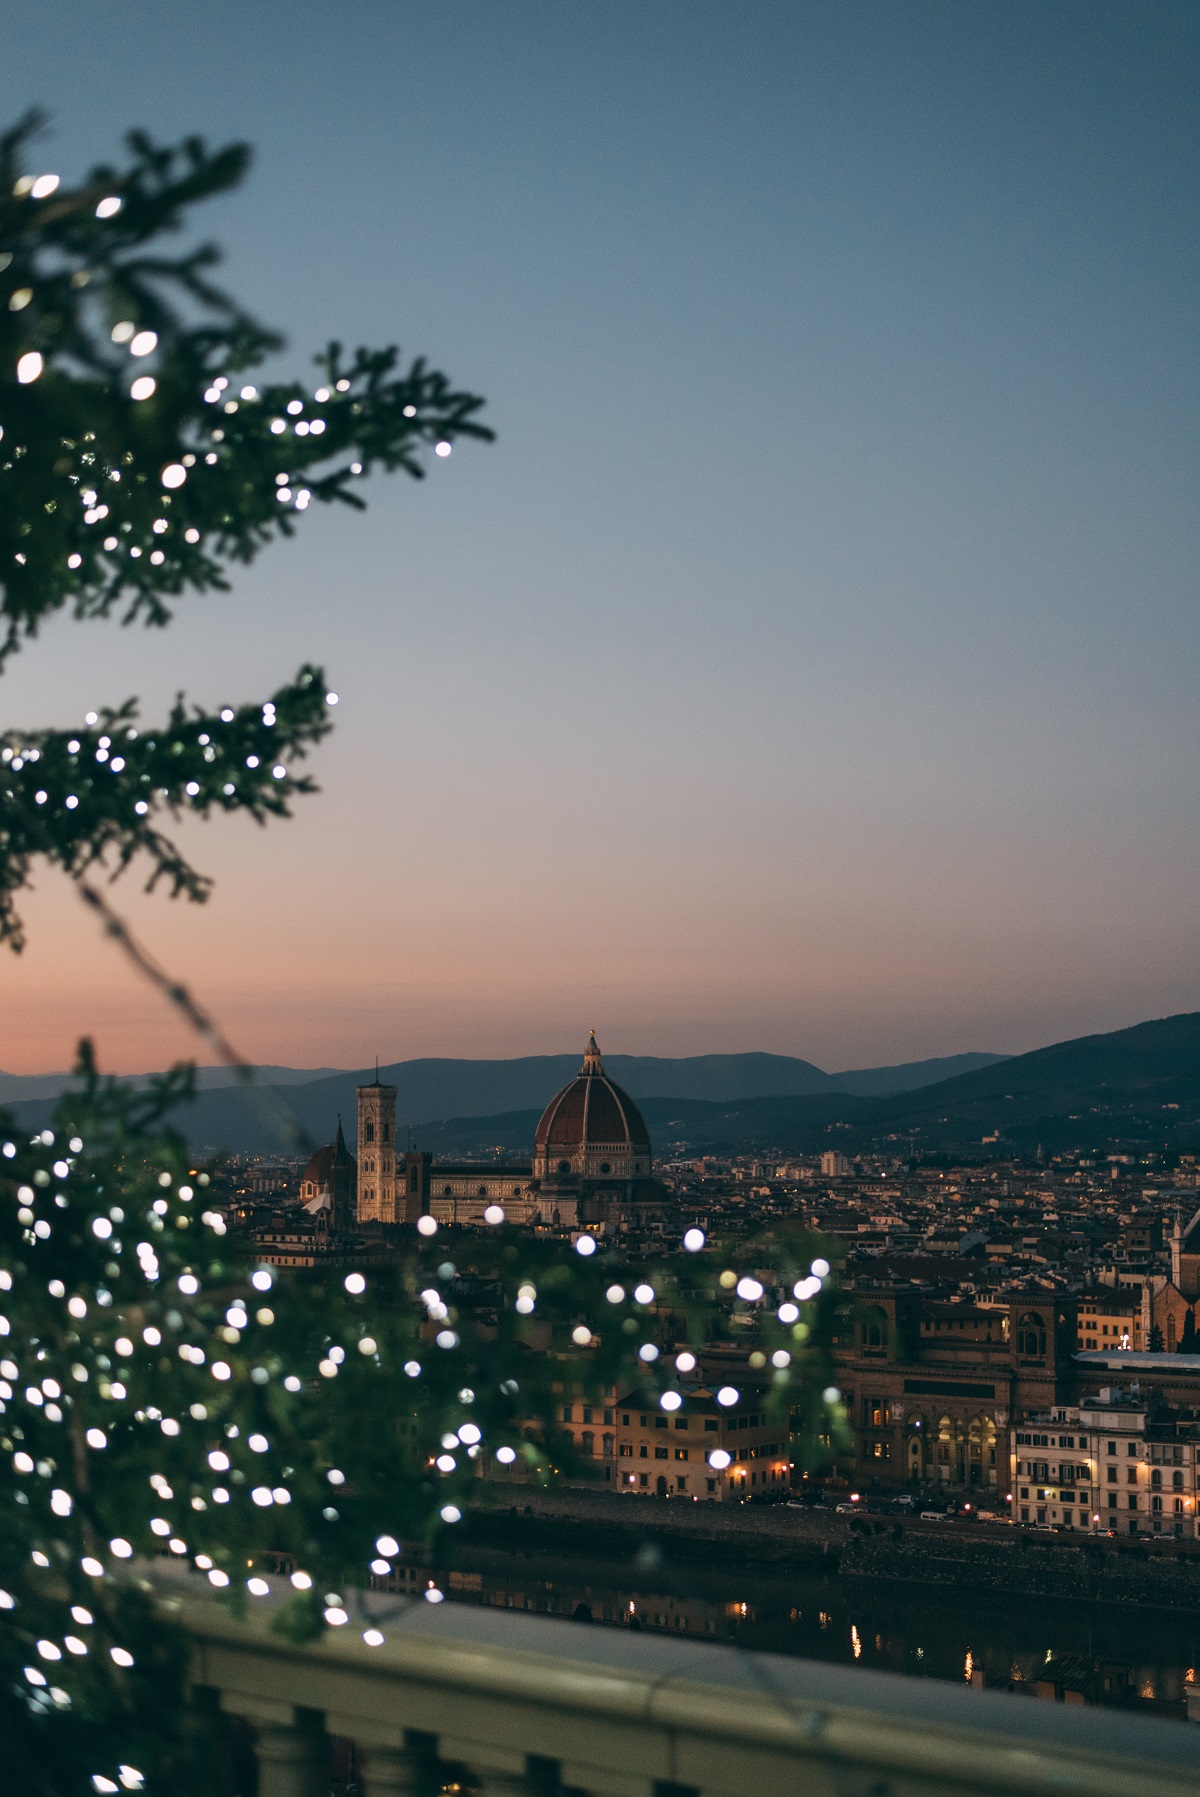 Florence in winter with holiday lights, as seen from the top of a hill